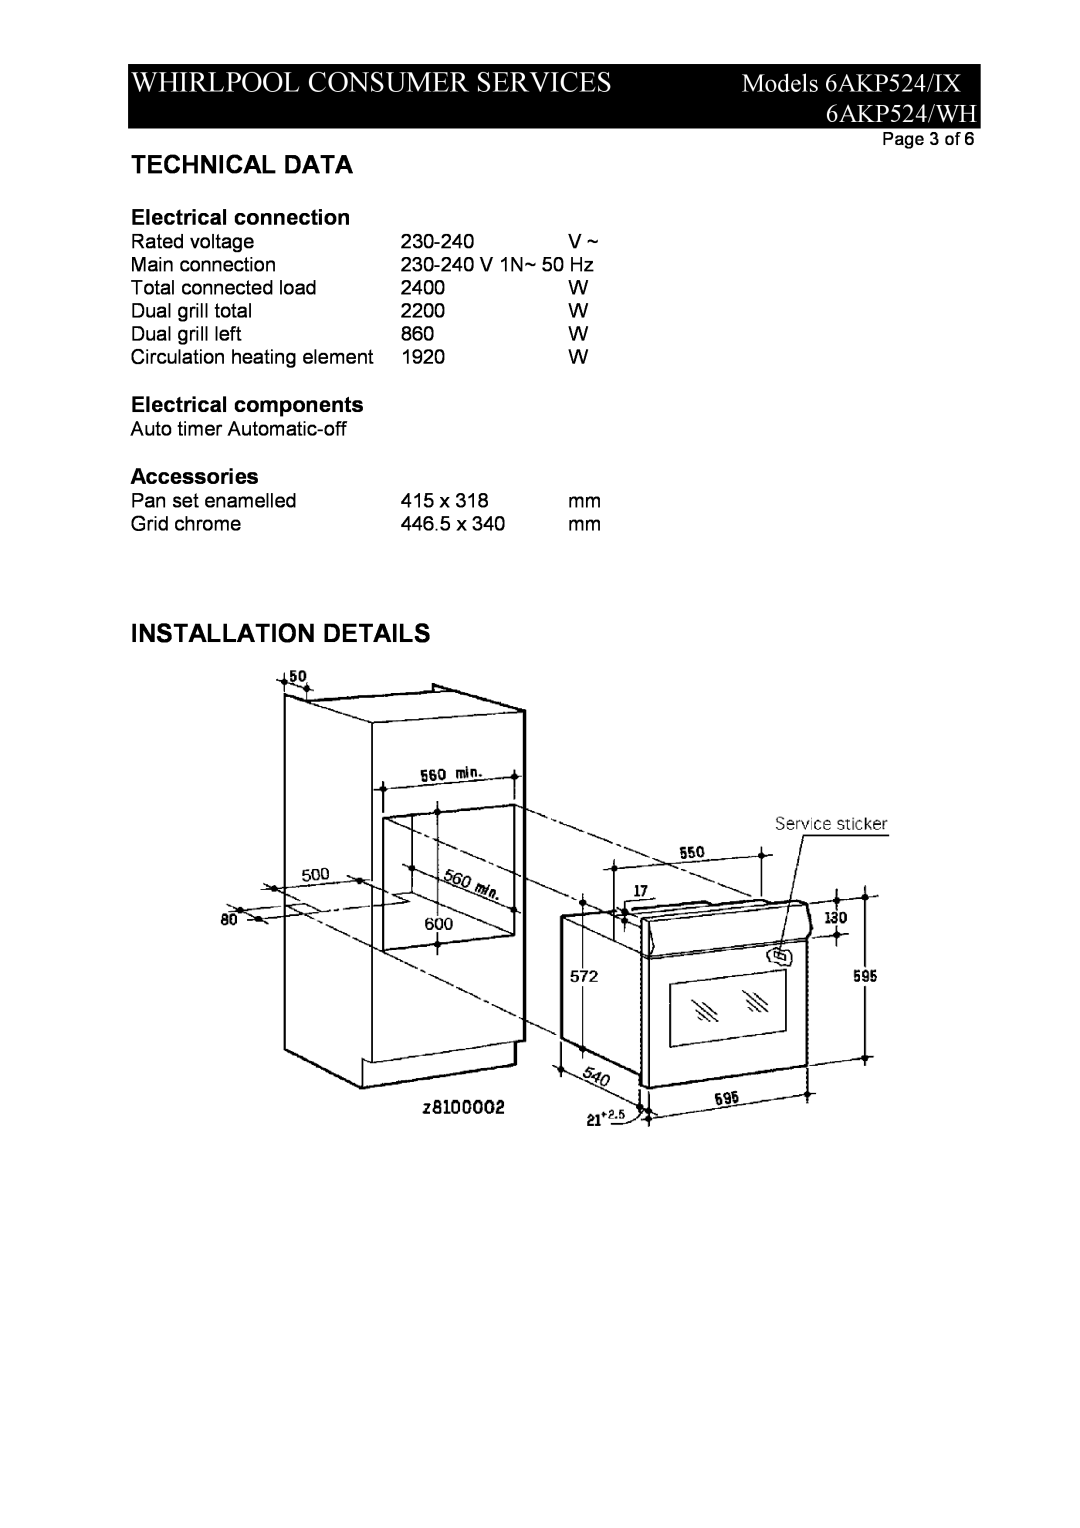 Whirlpool Technical Data, Installation Details, Whirlpool Consumer Services, Models 6AKP524/IX, 6AKP524/WH, Accessories 